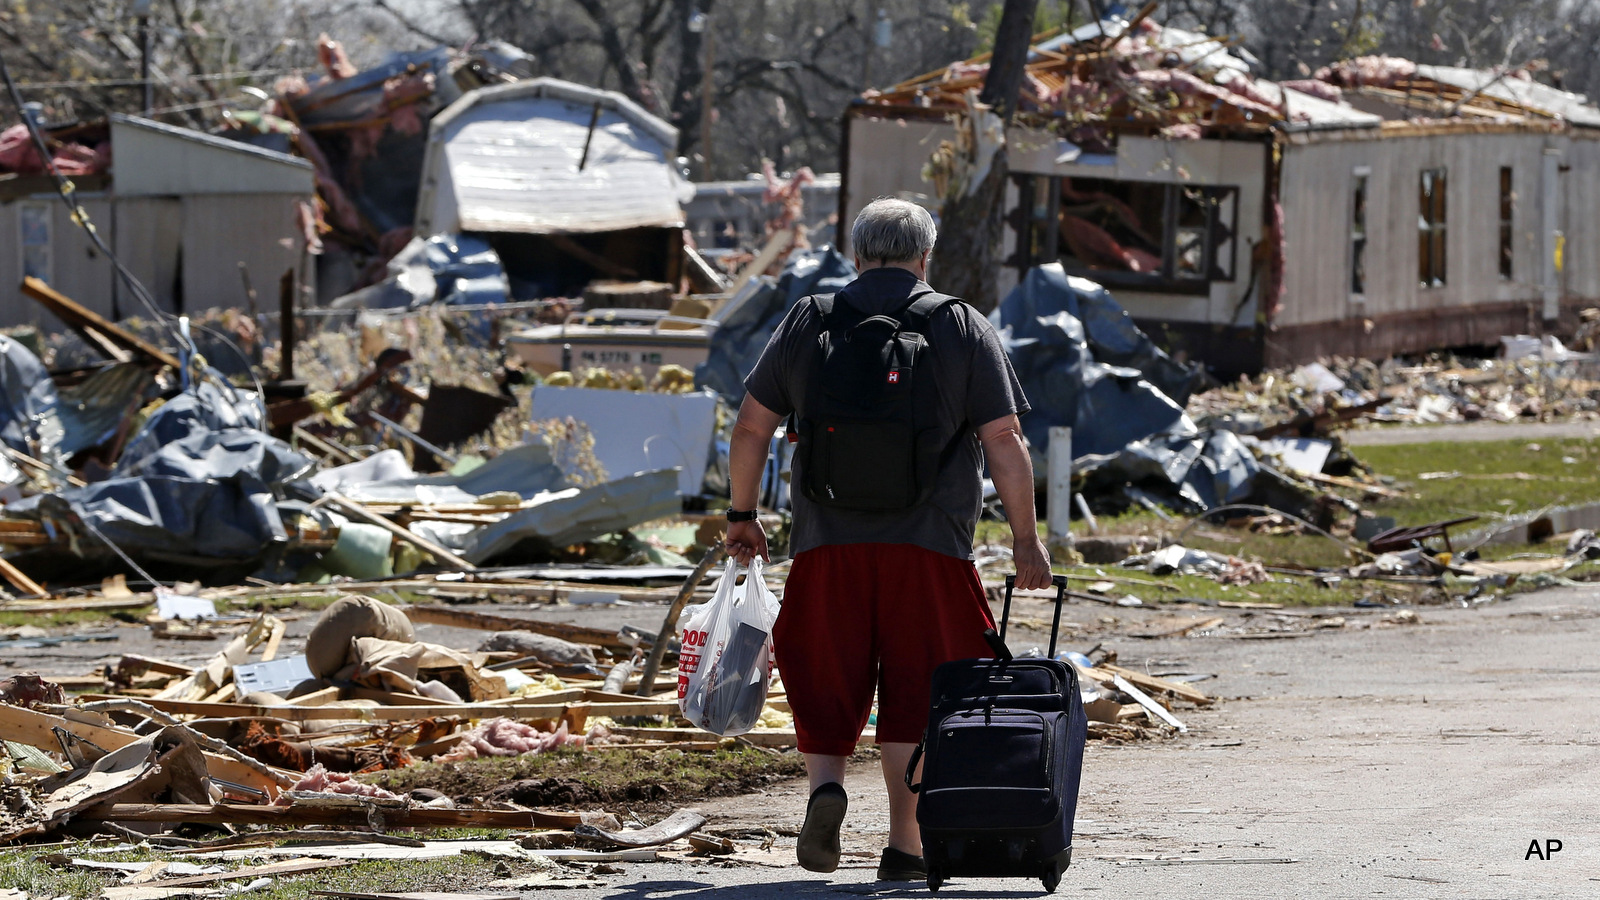 Robert Swanson carts out some of his belongings through a tornado-damaged mobile home park in Sand Springs, Okla., Thursday, March 26, 2015. (AP Photo/Sue Ogrocki)